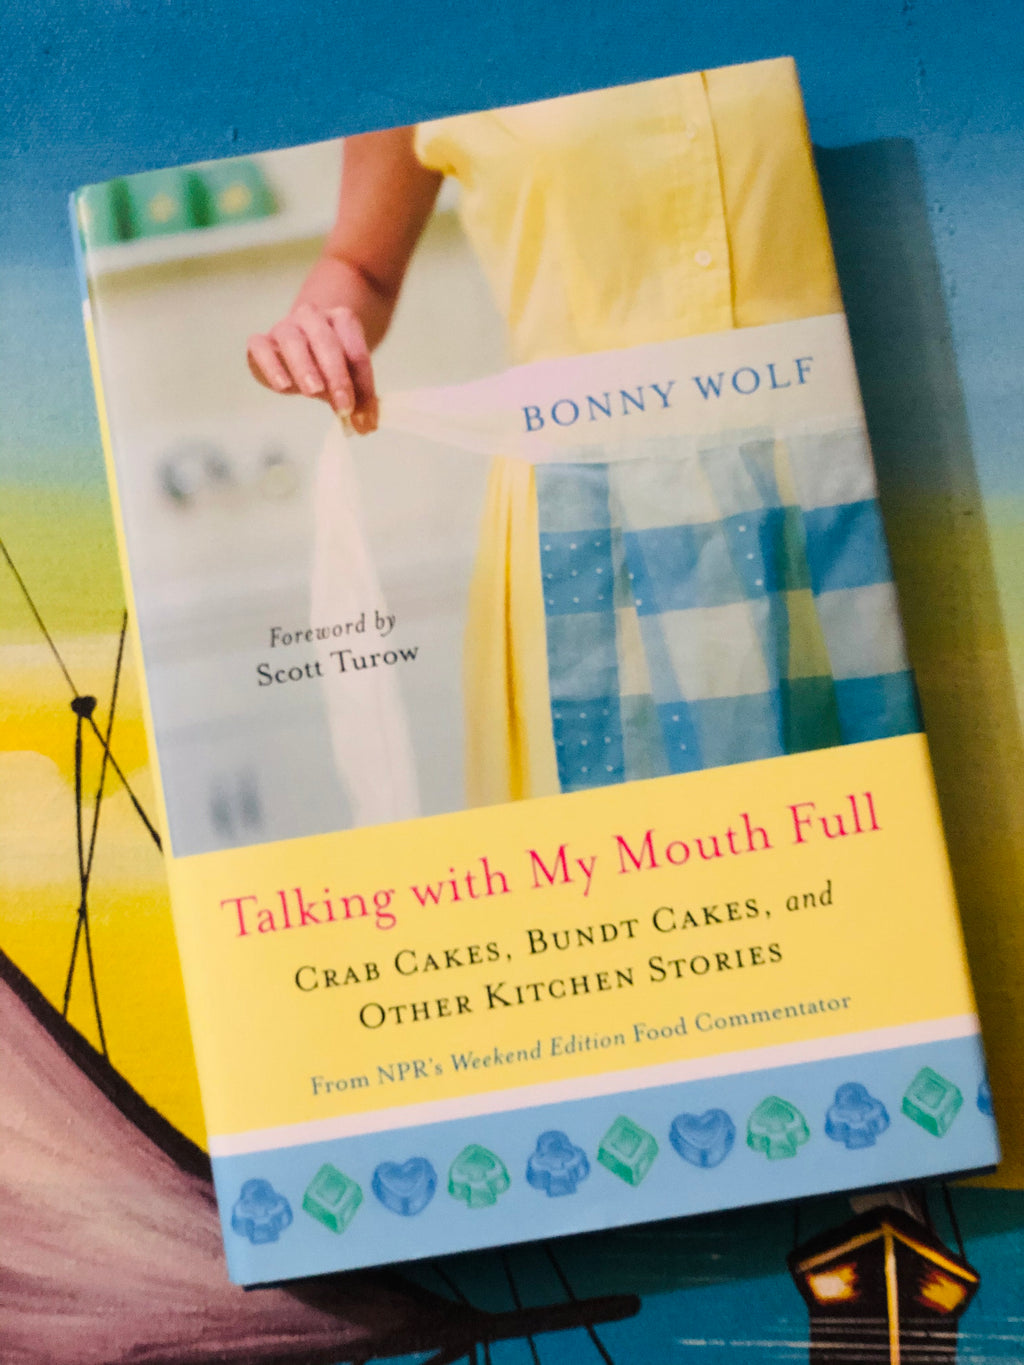 Talking With My Mouth Full- By Bonny Wolf